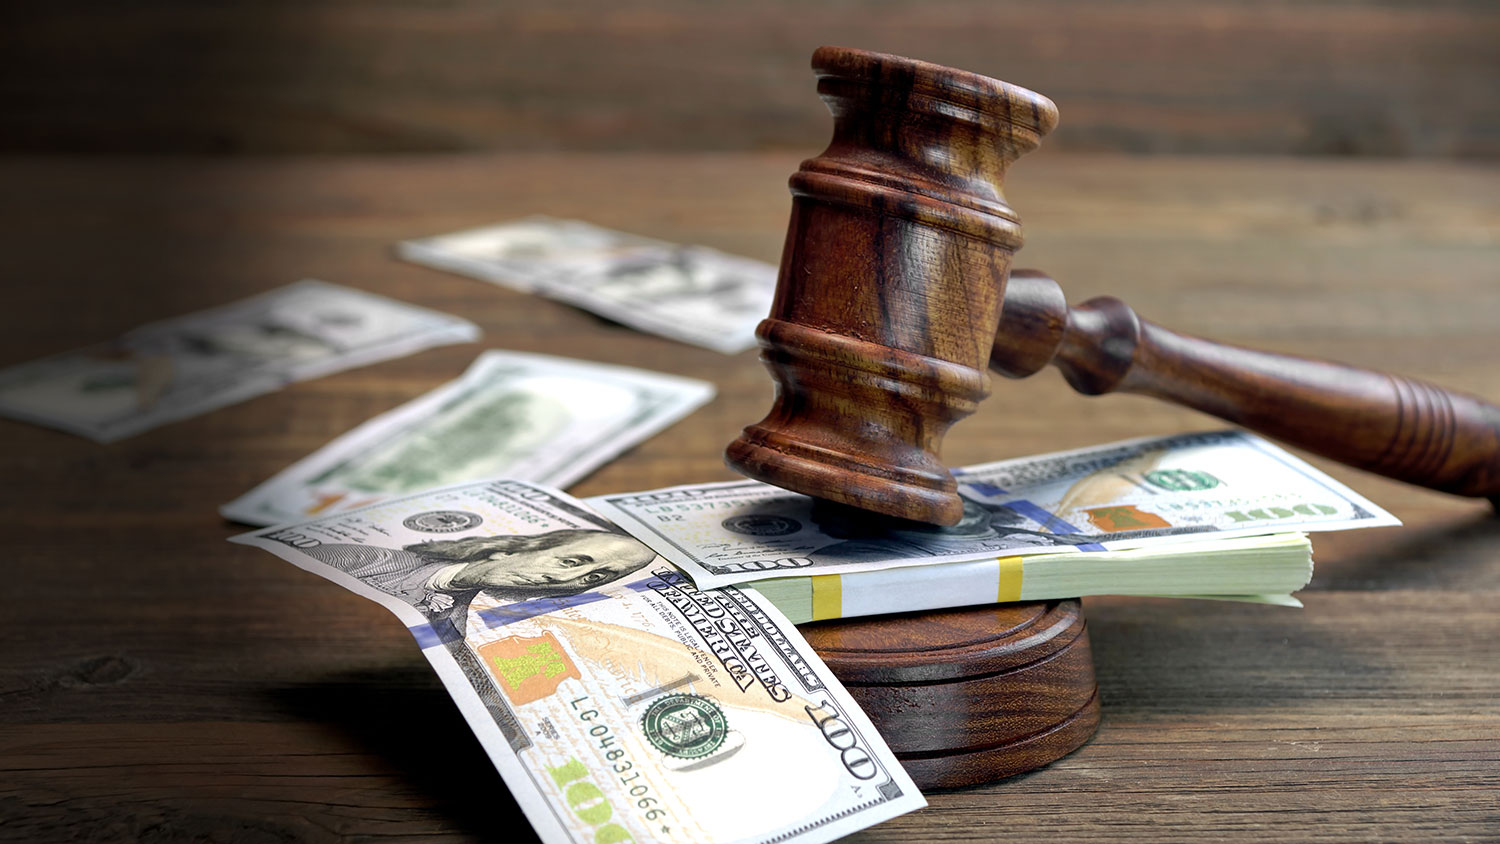 A gavel rests on top of 100 dollar bills